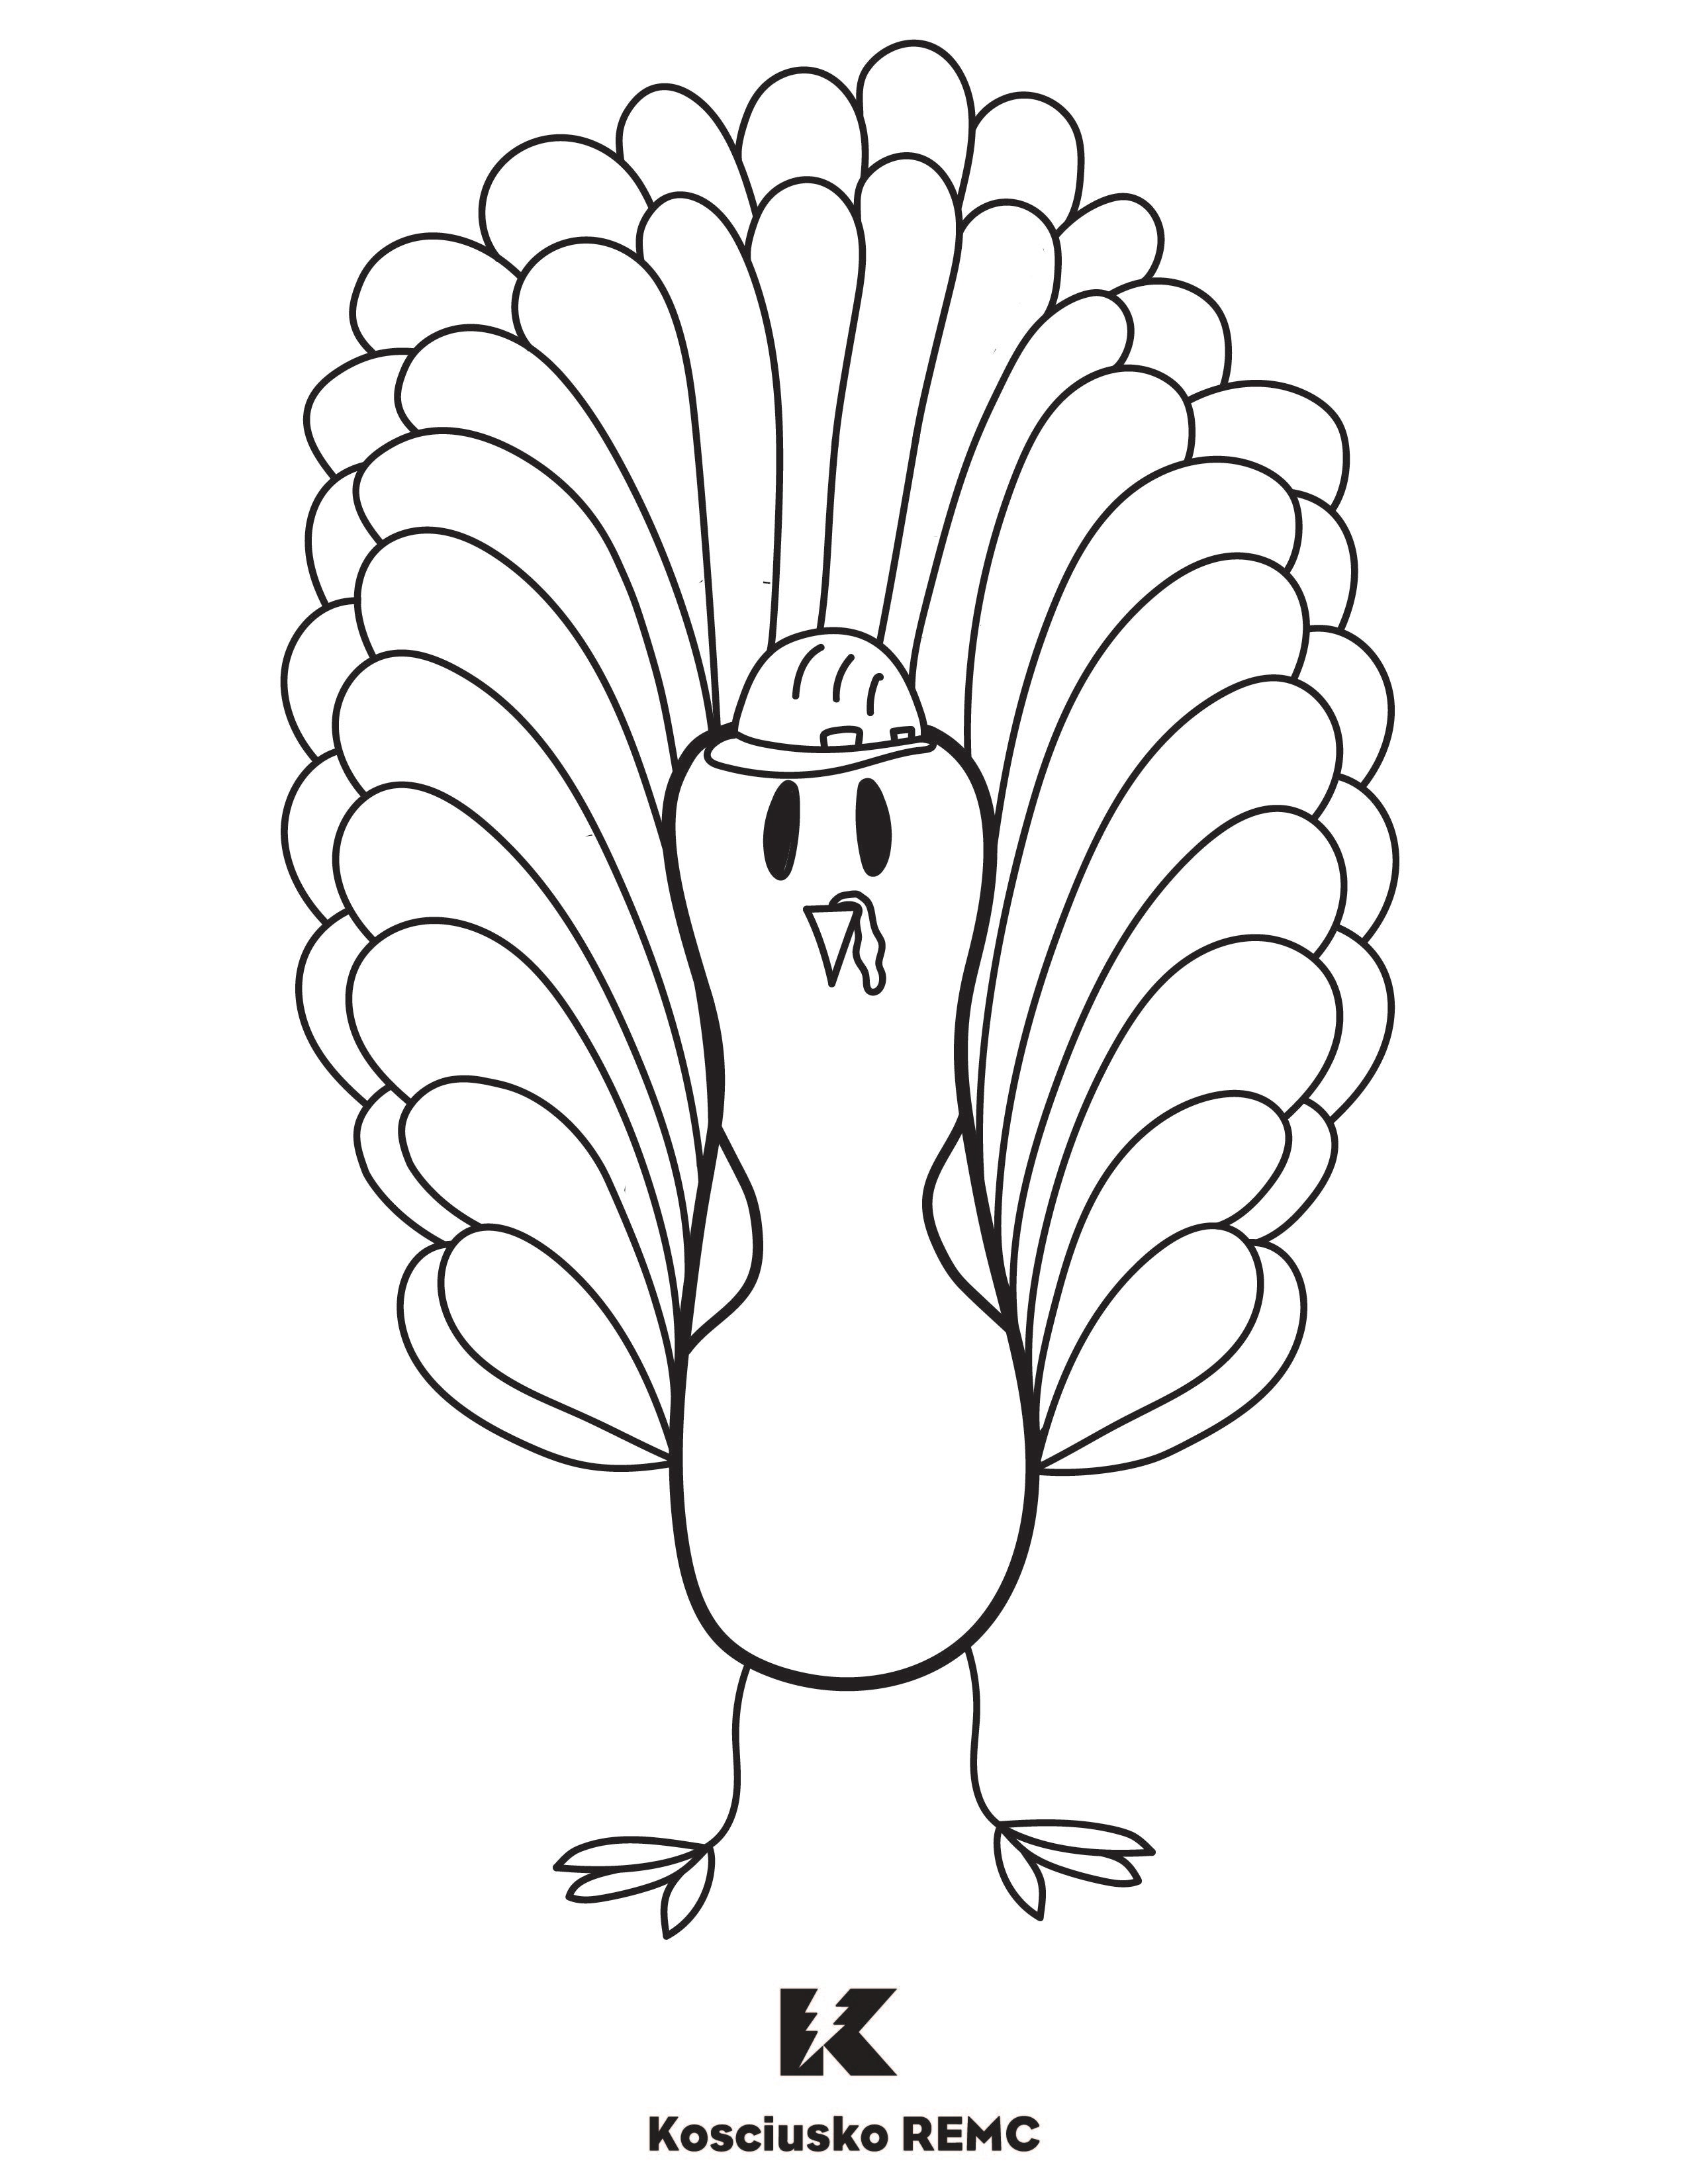 Thanksgiving turkey with lineman hat coloring page